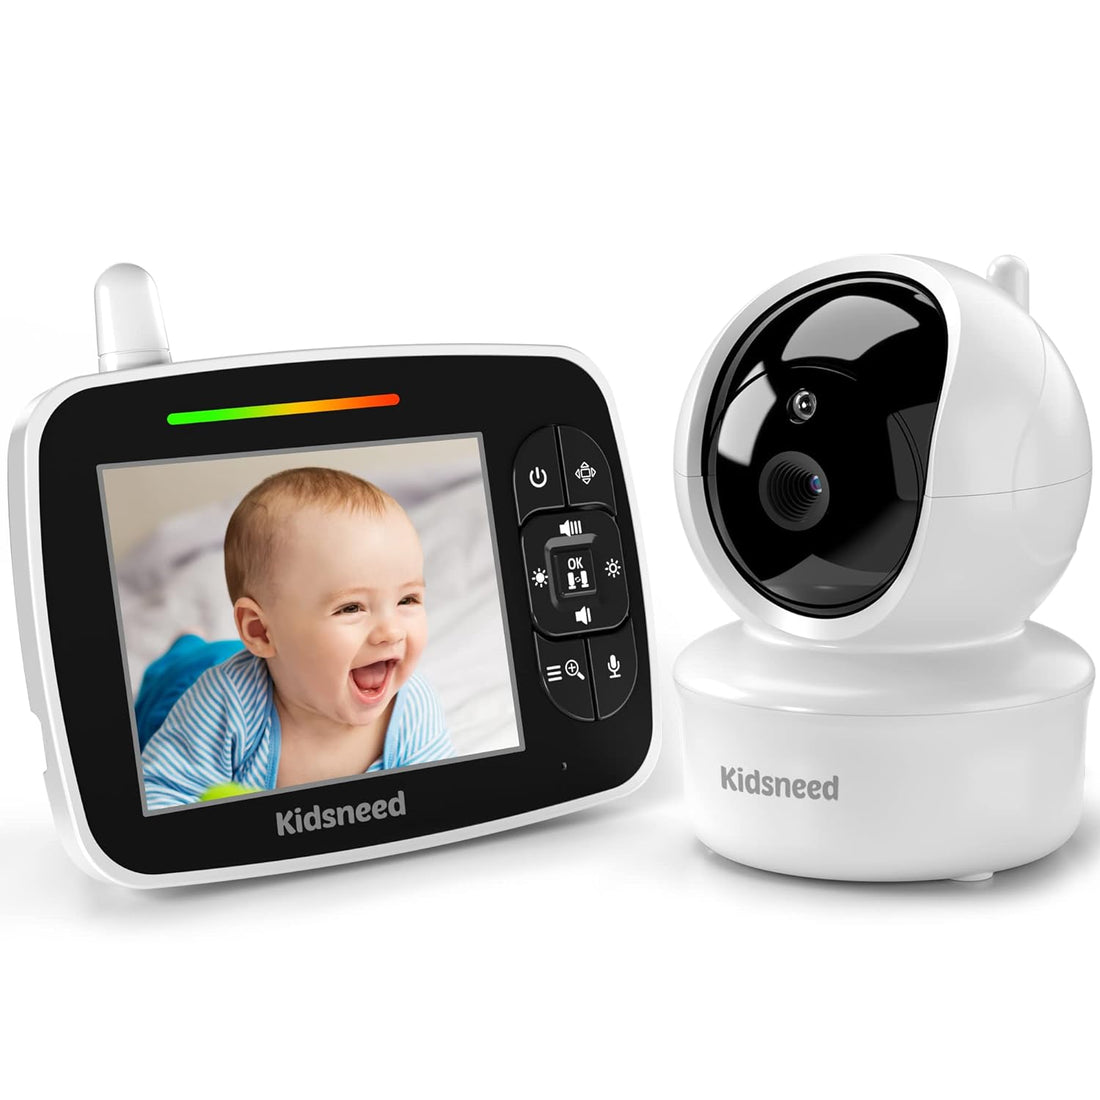 Baby Monitor, Kidsneed Video Baby Monitor with Remote Pan-Tilt-Zoom Camera and Audio, Large Screen Night Vision, Two Way Talk, Temperature Display, Lullabies, VOX Mode, 960ft Range